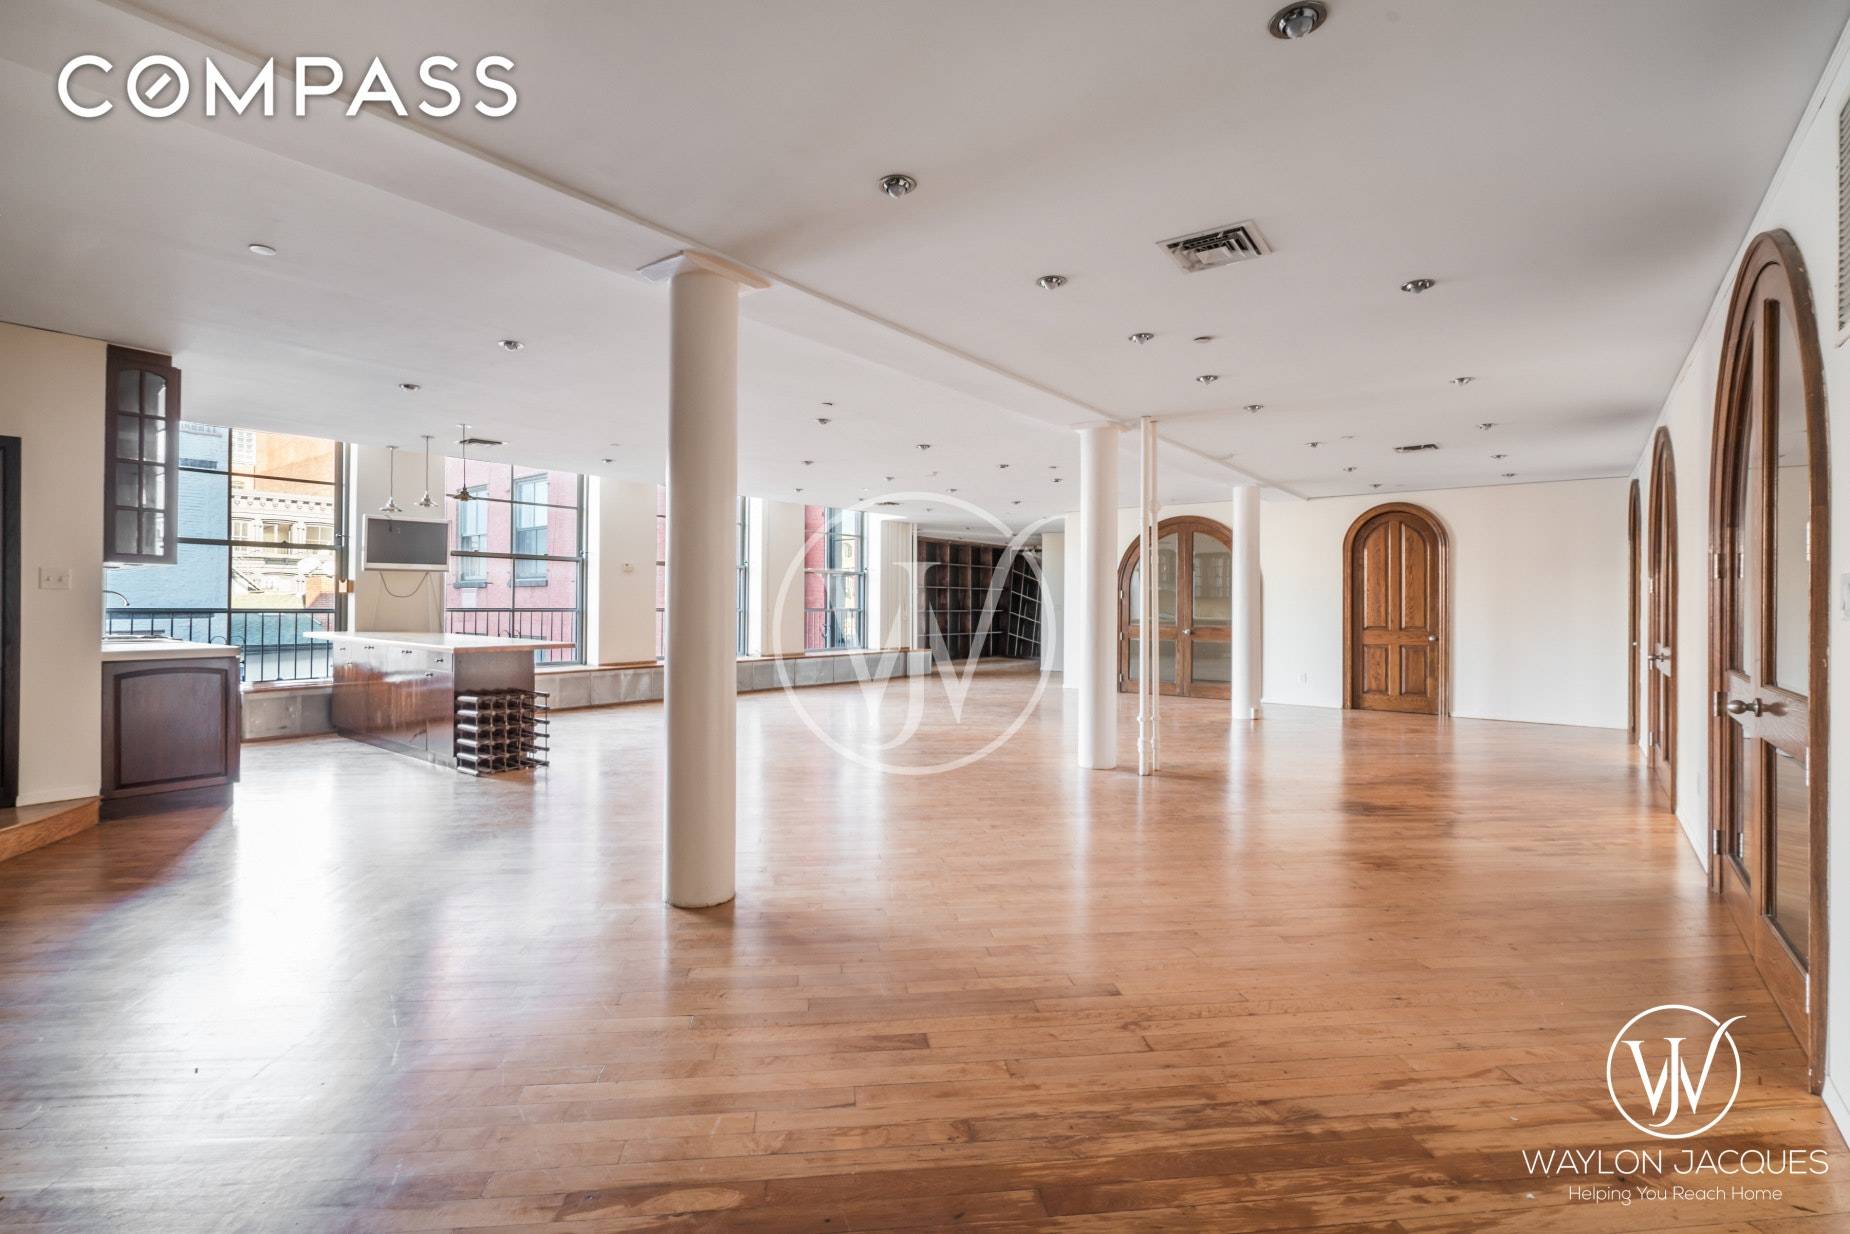 This beautiful, approximately 3, 000 square feet loft is freshly painted and offers a superior comfort, phenomenal proportions and a tremendous opportunity to live in the most desirable location in ...